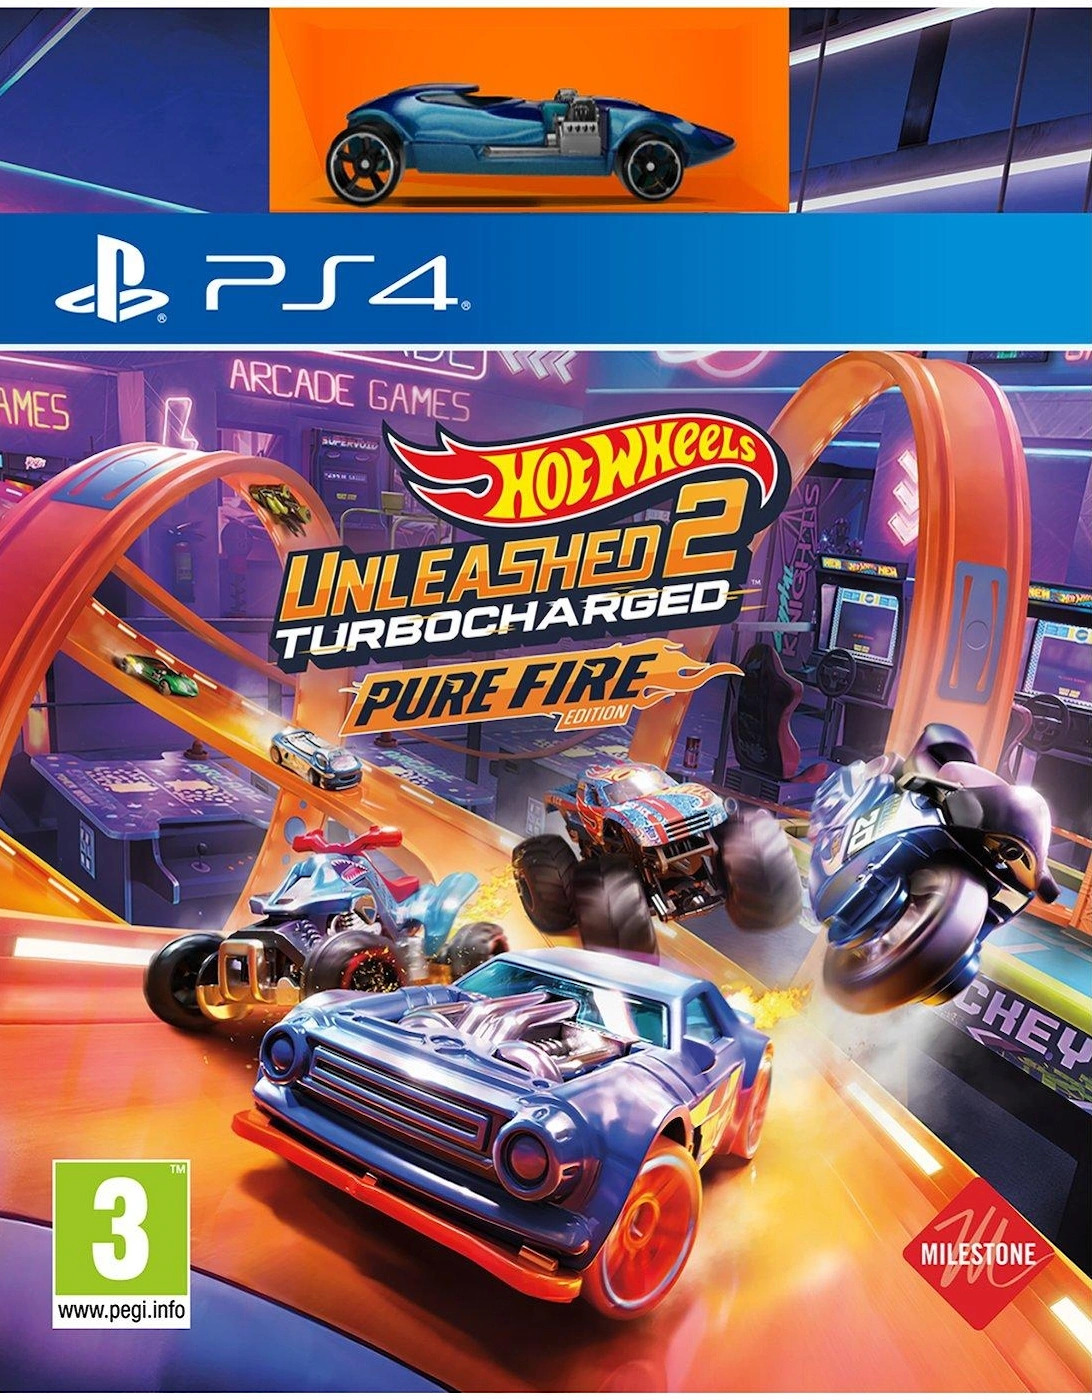 Hot Wheels Unleashed 2 Turbocharged - Pure Fire Edition, 2 of 1